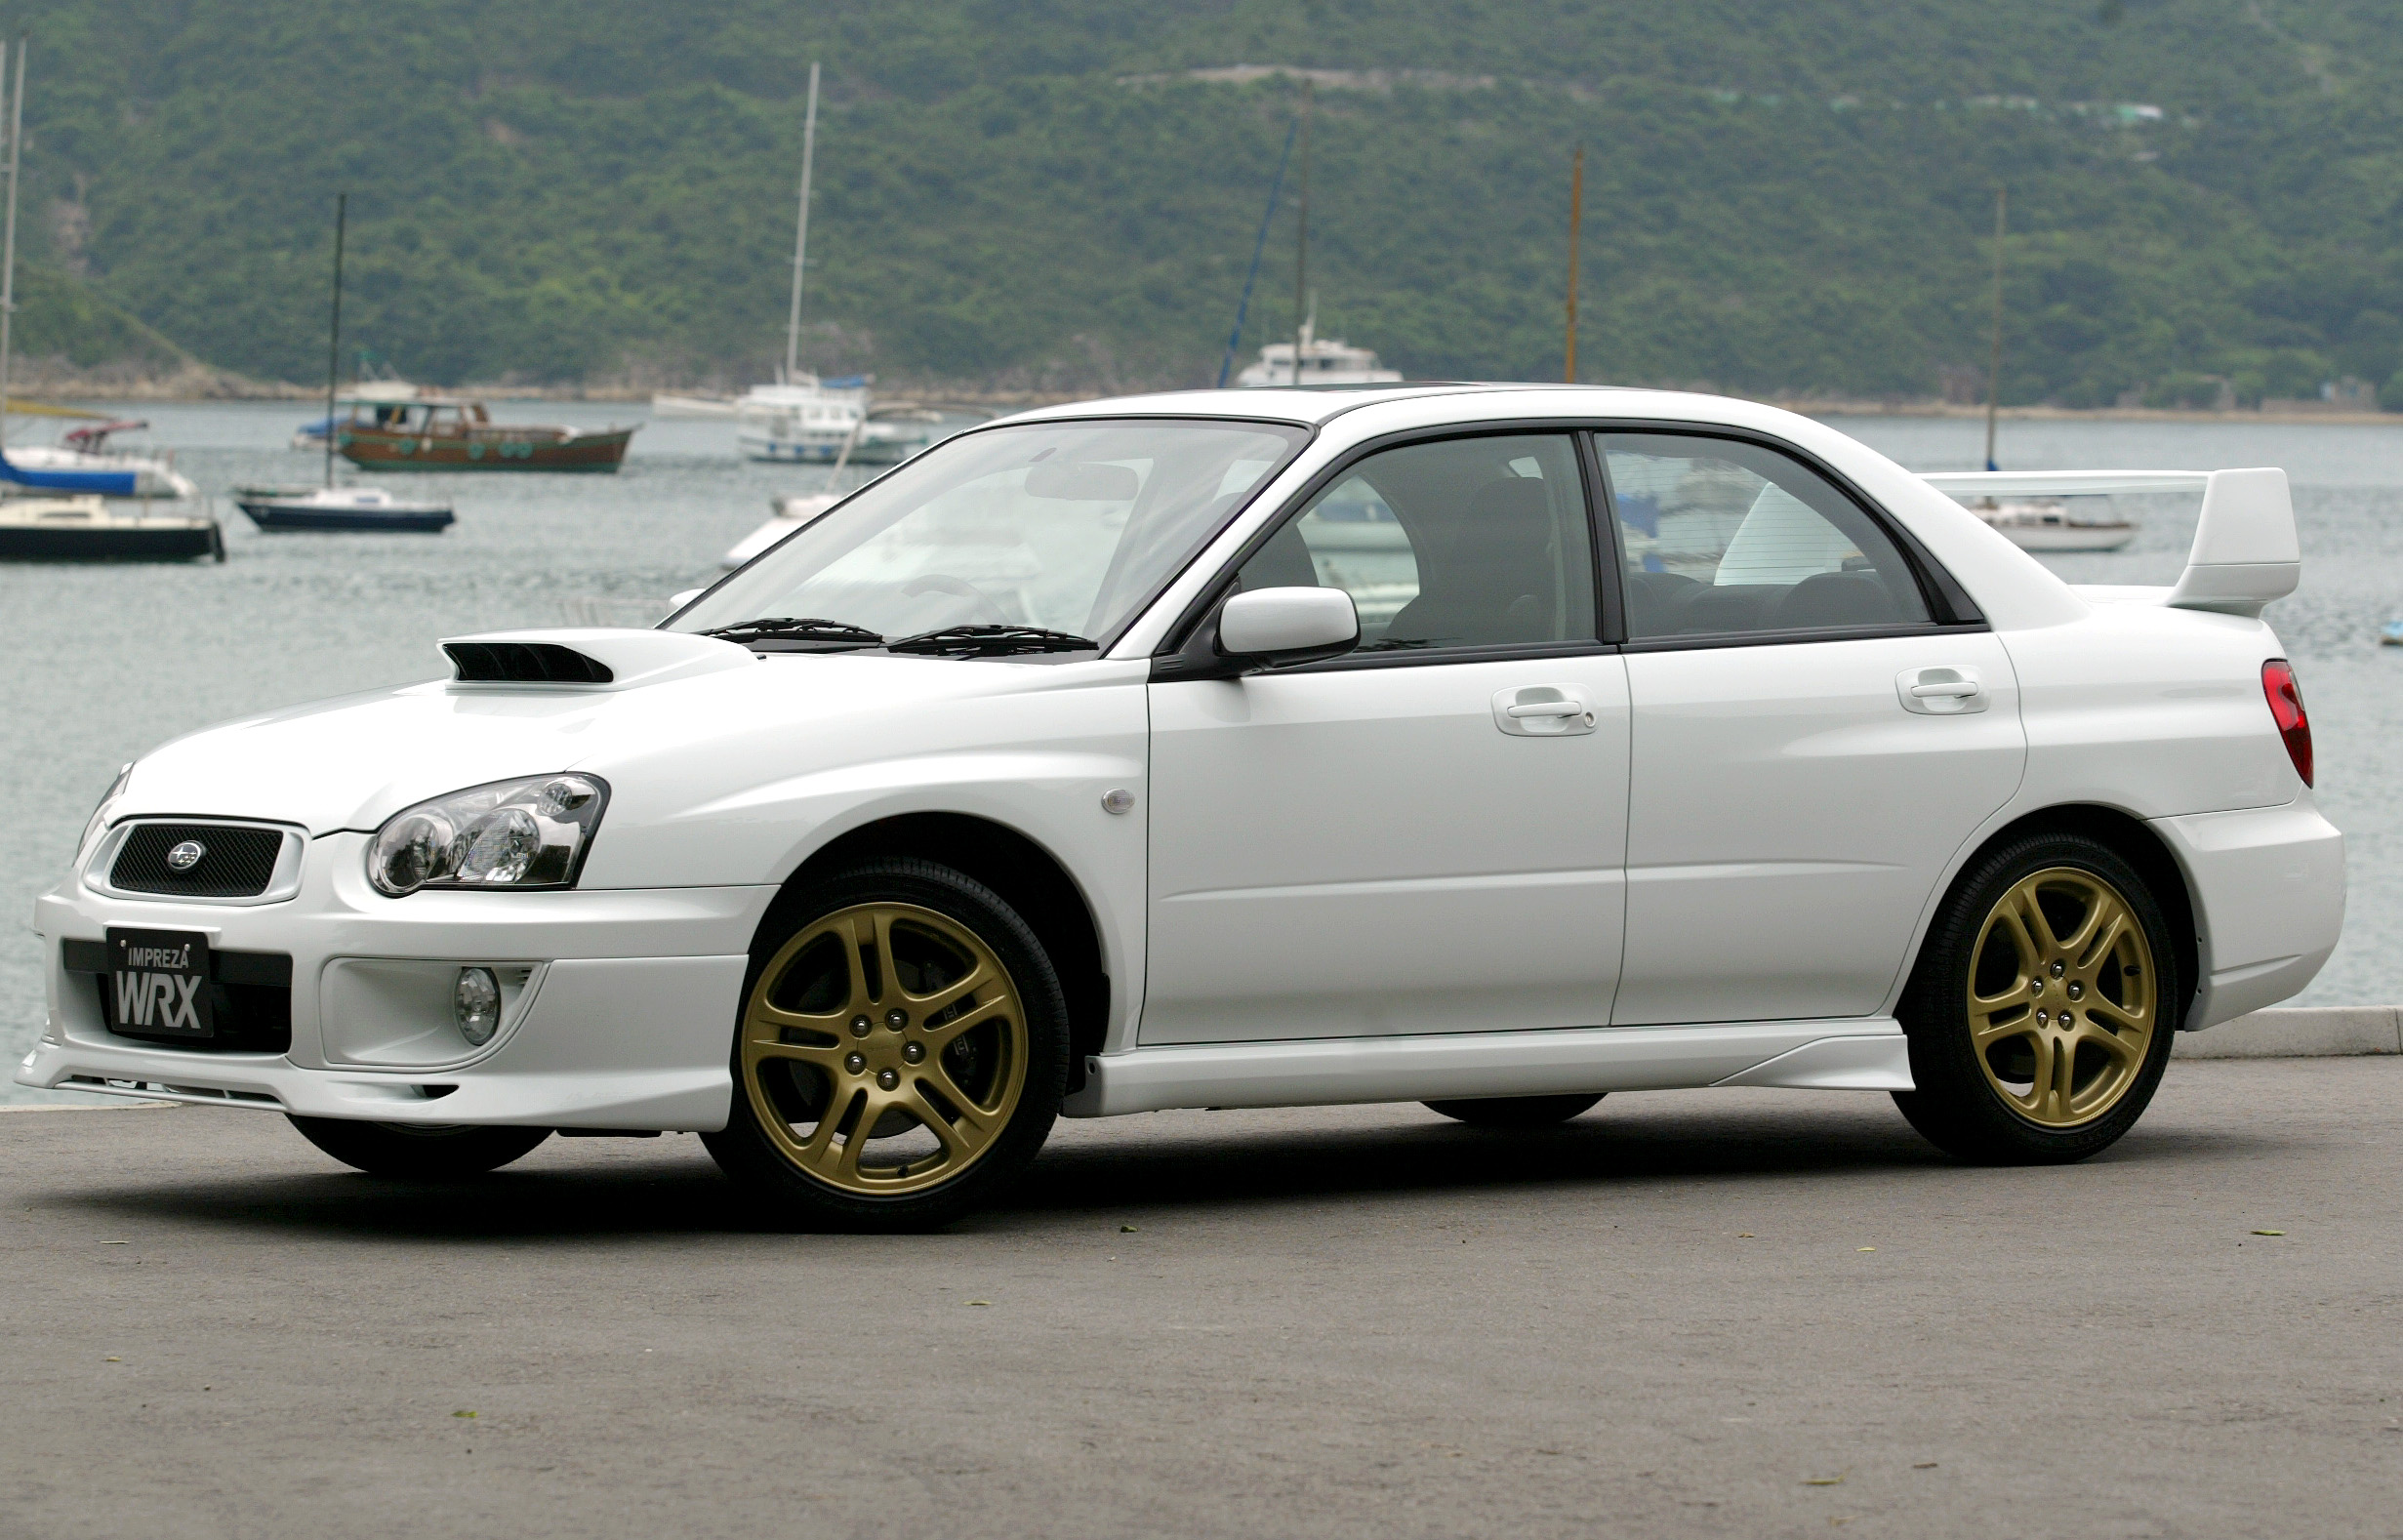 A white Subaru WRX with gold wheels and spoiler